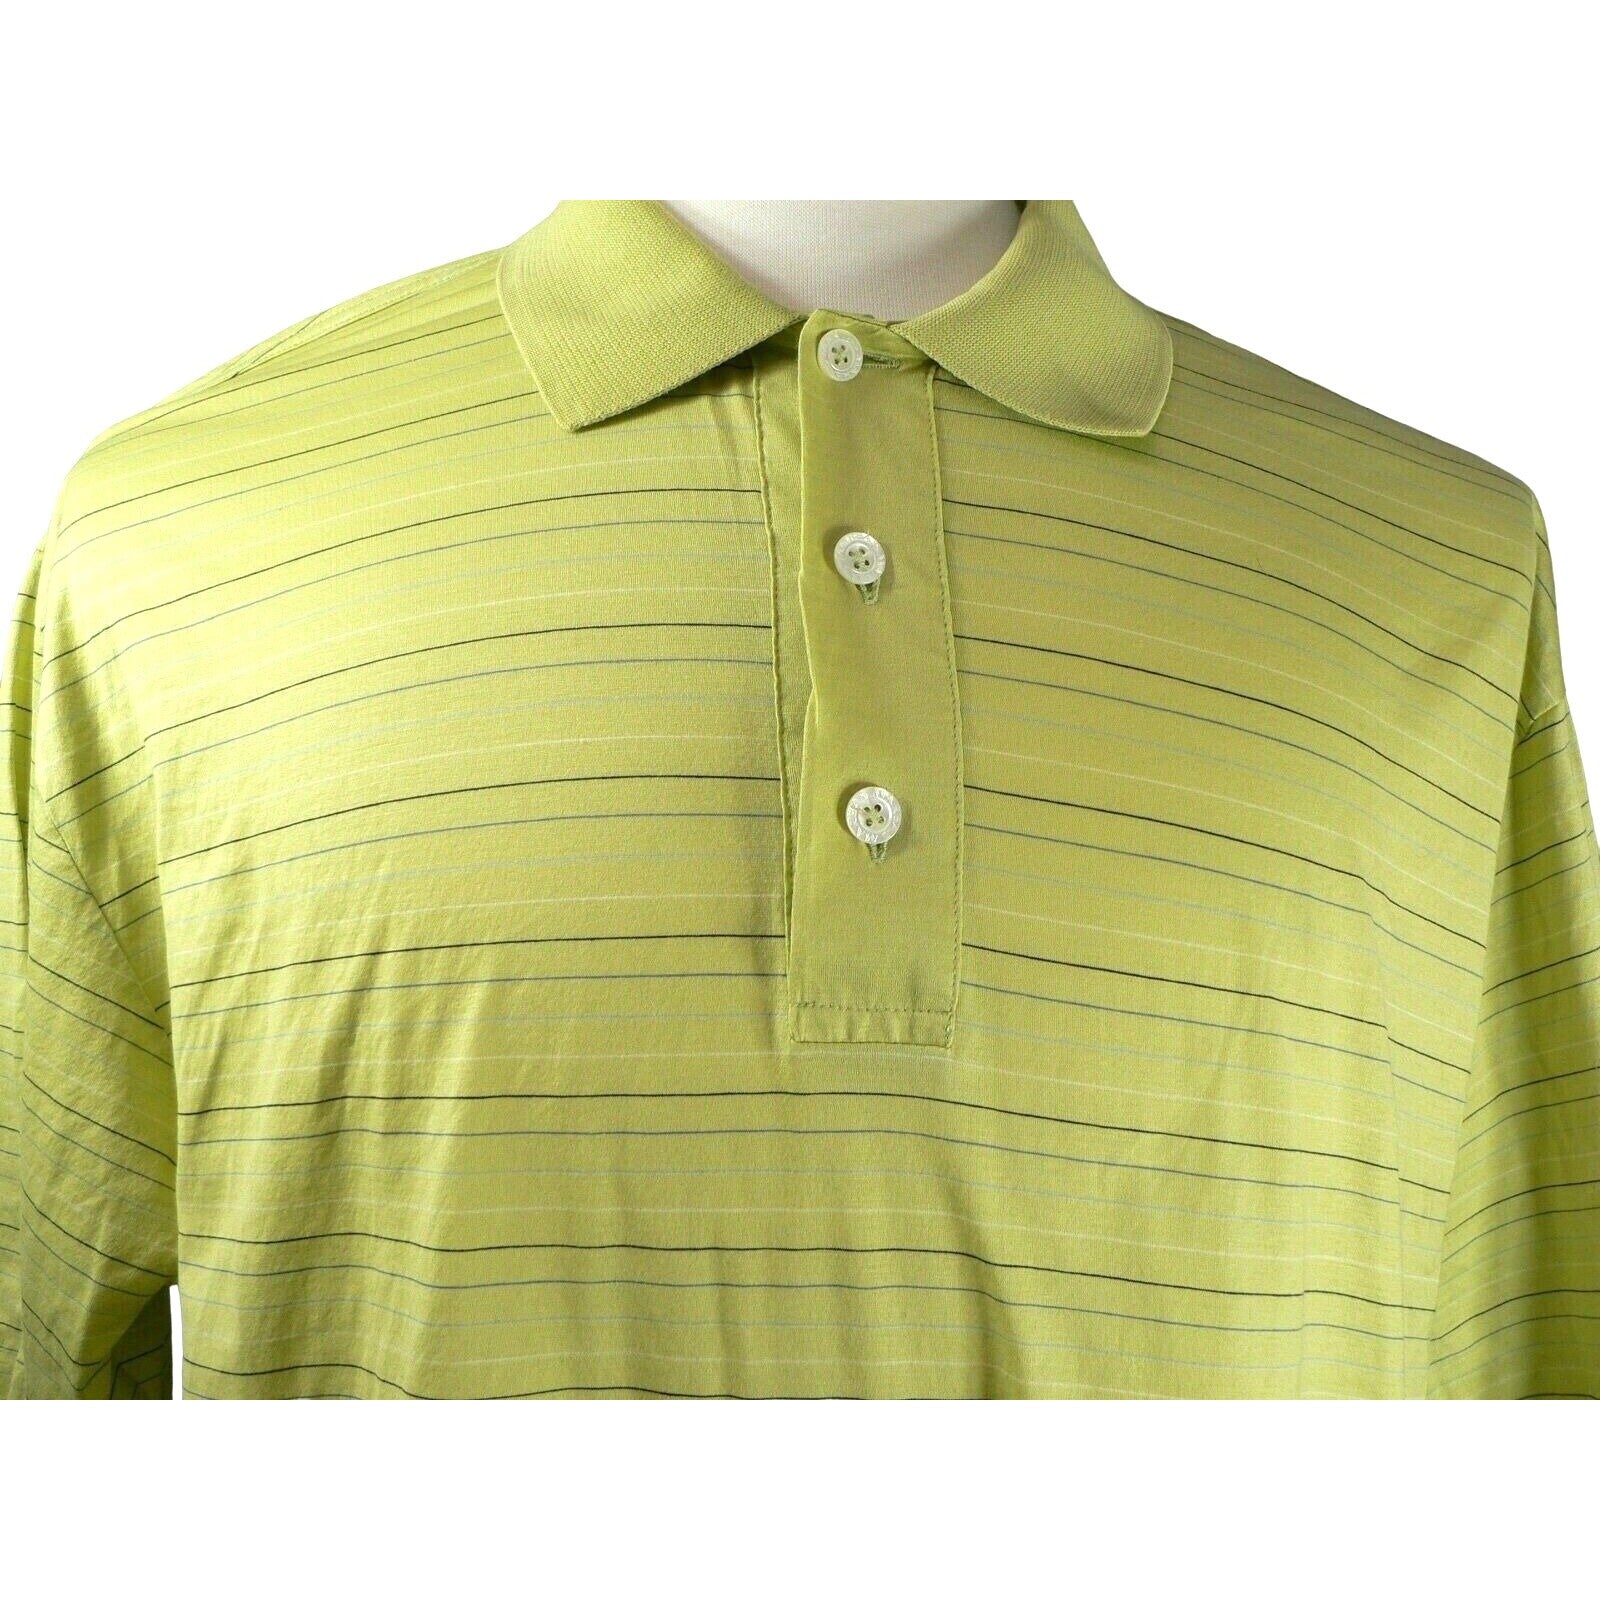 Golf Shirt Marbas Embroidered Whistling Straights logo Men's L 100% Cotton